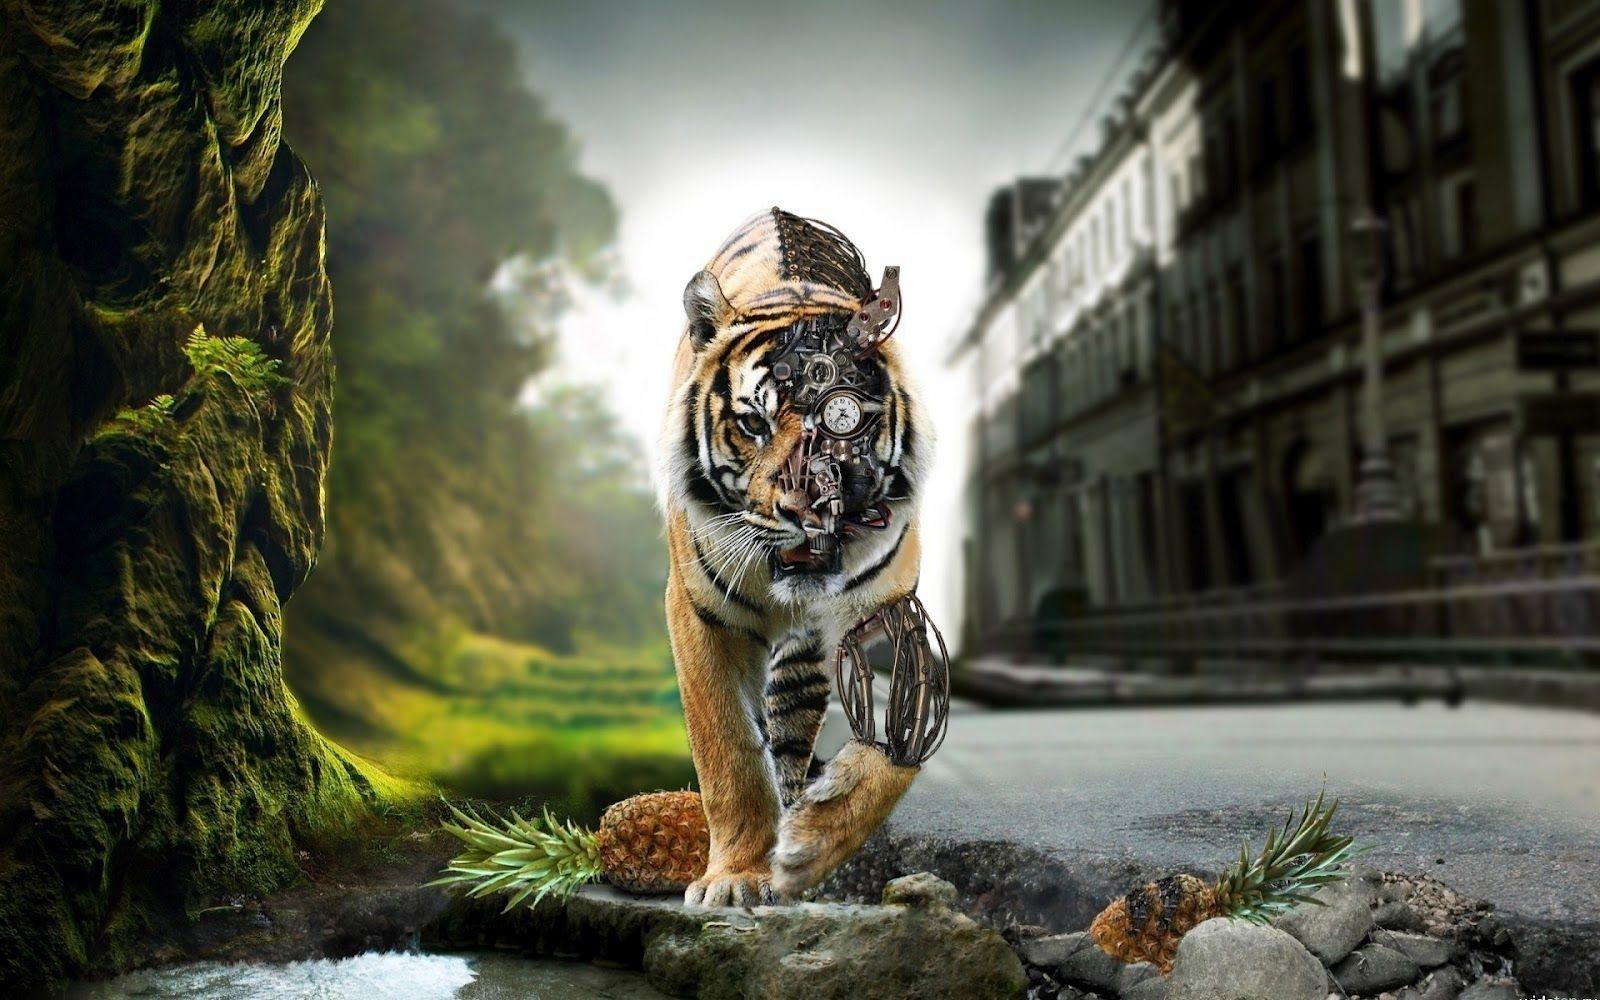 hd wallpaper of tigers (5).in. Find high Quality